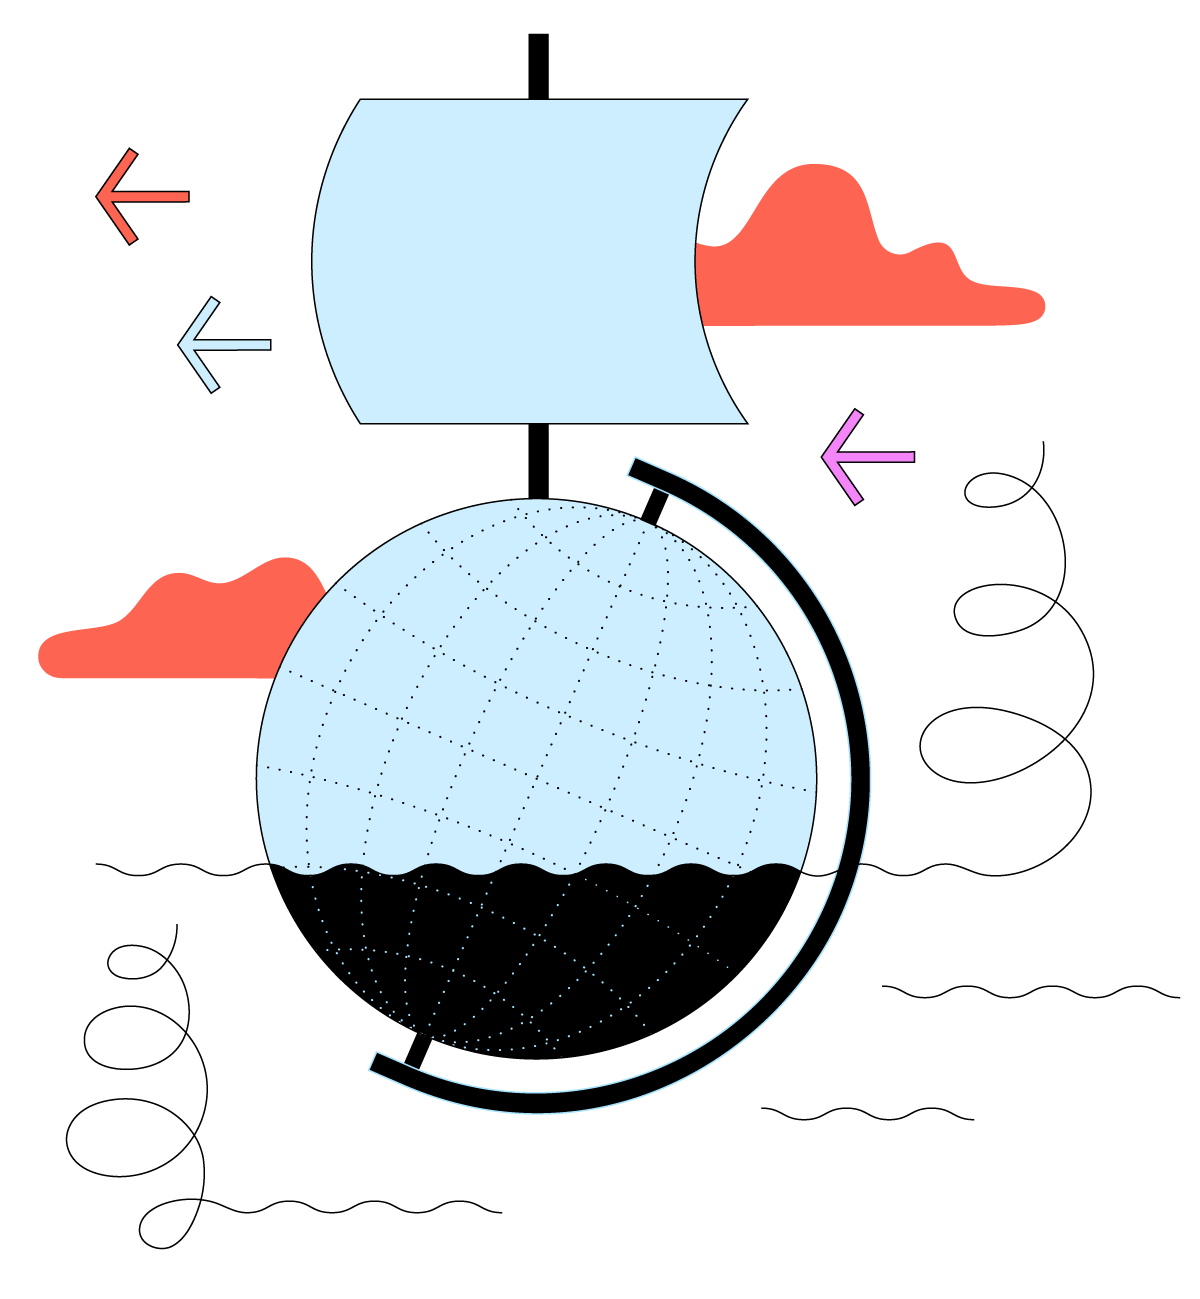 Cartoon graphic of the ocean with a globe in it with a sail attached on top, making the globe look like a sailboat